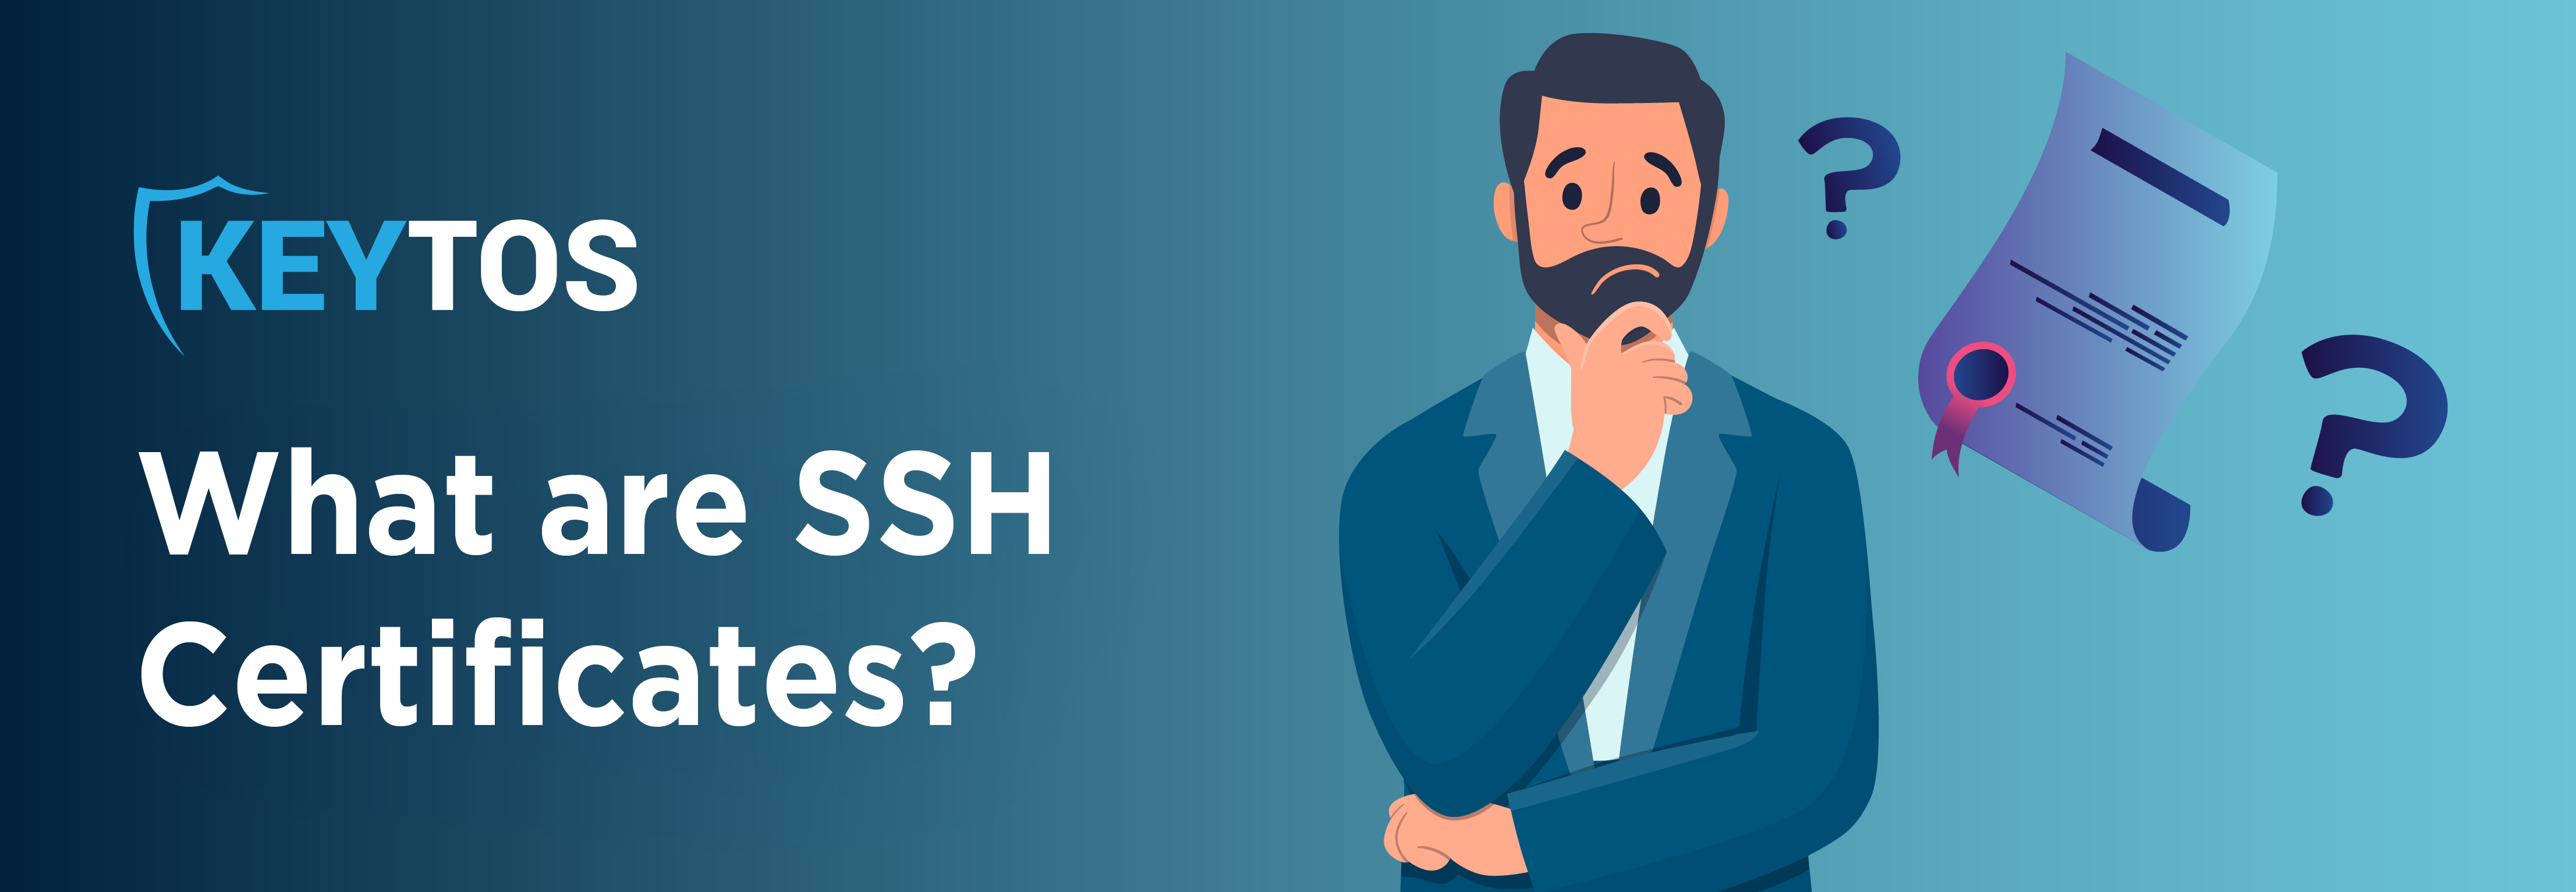 What are SSH Certificates? SSH Certificates Explained.